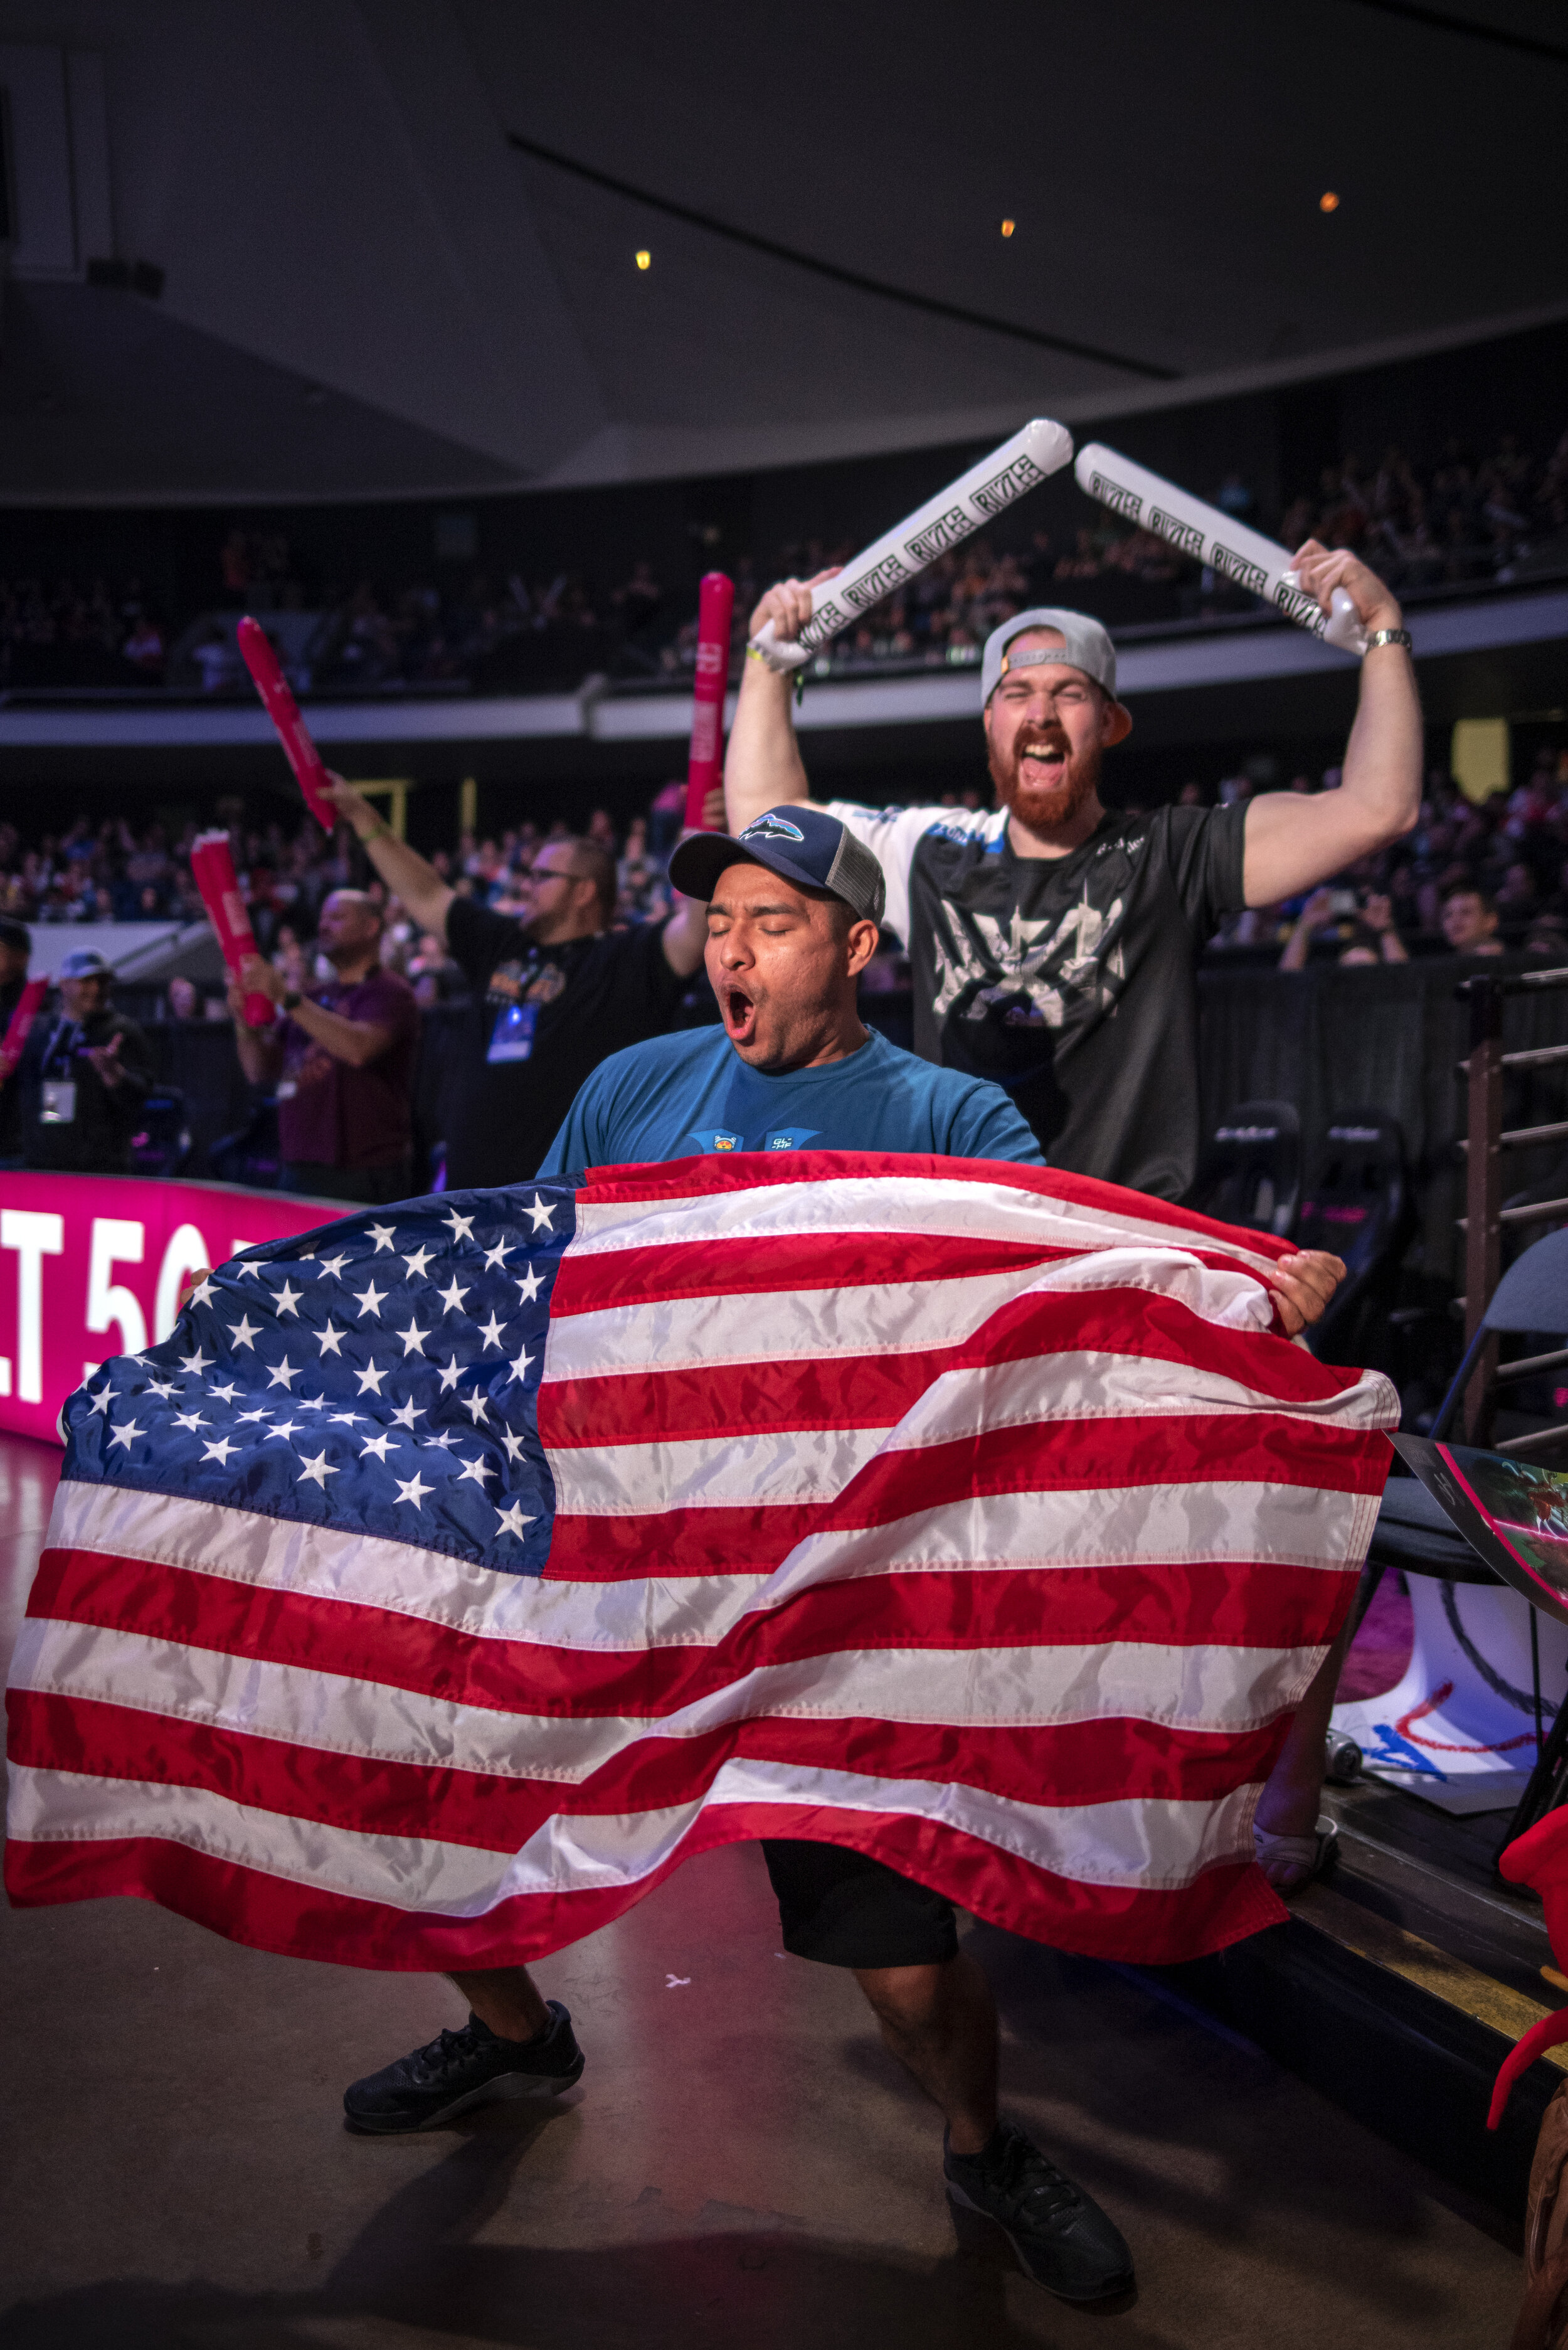 Fans Cheer on Team USA at the 2019 Overwatch World Cup